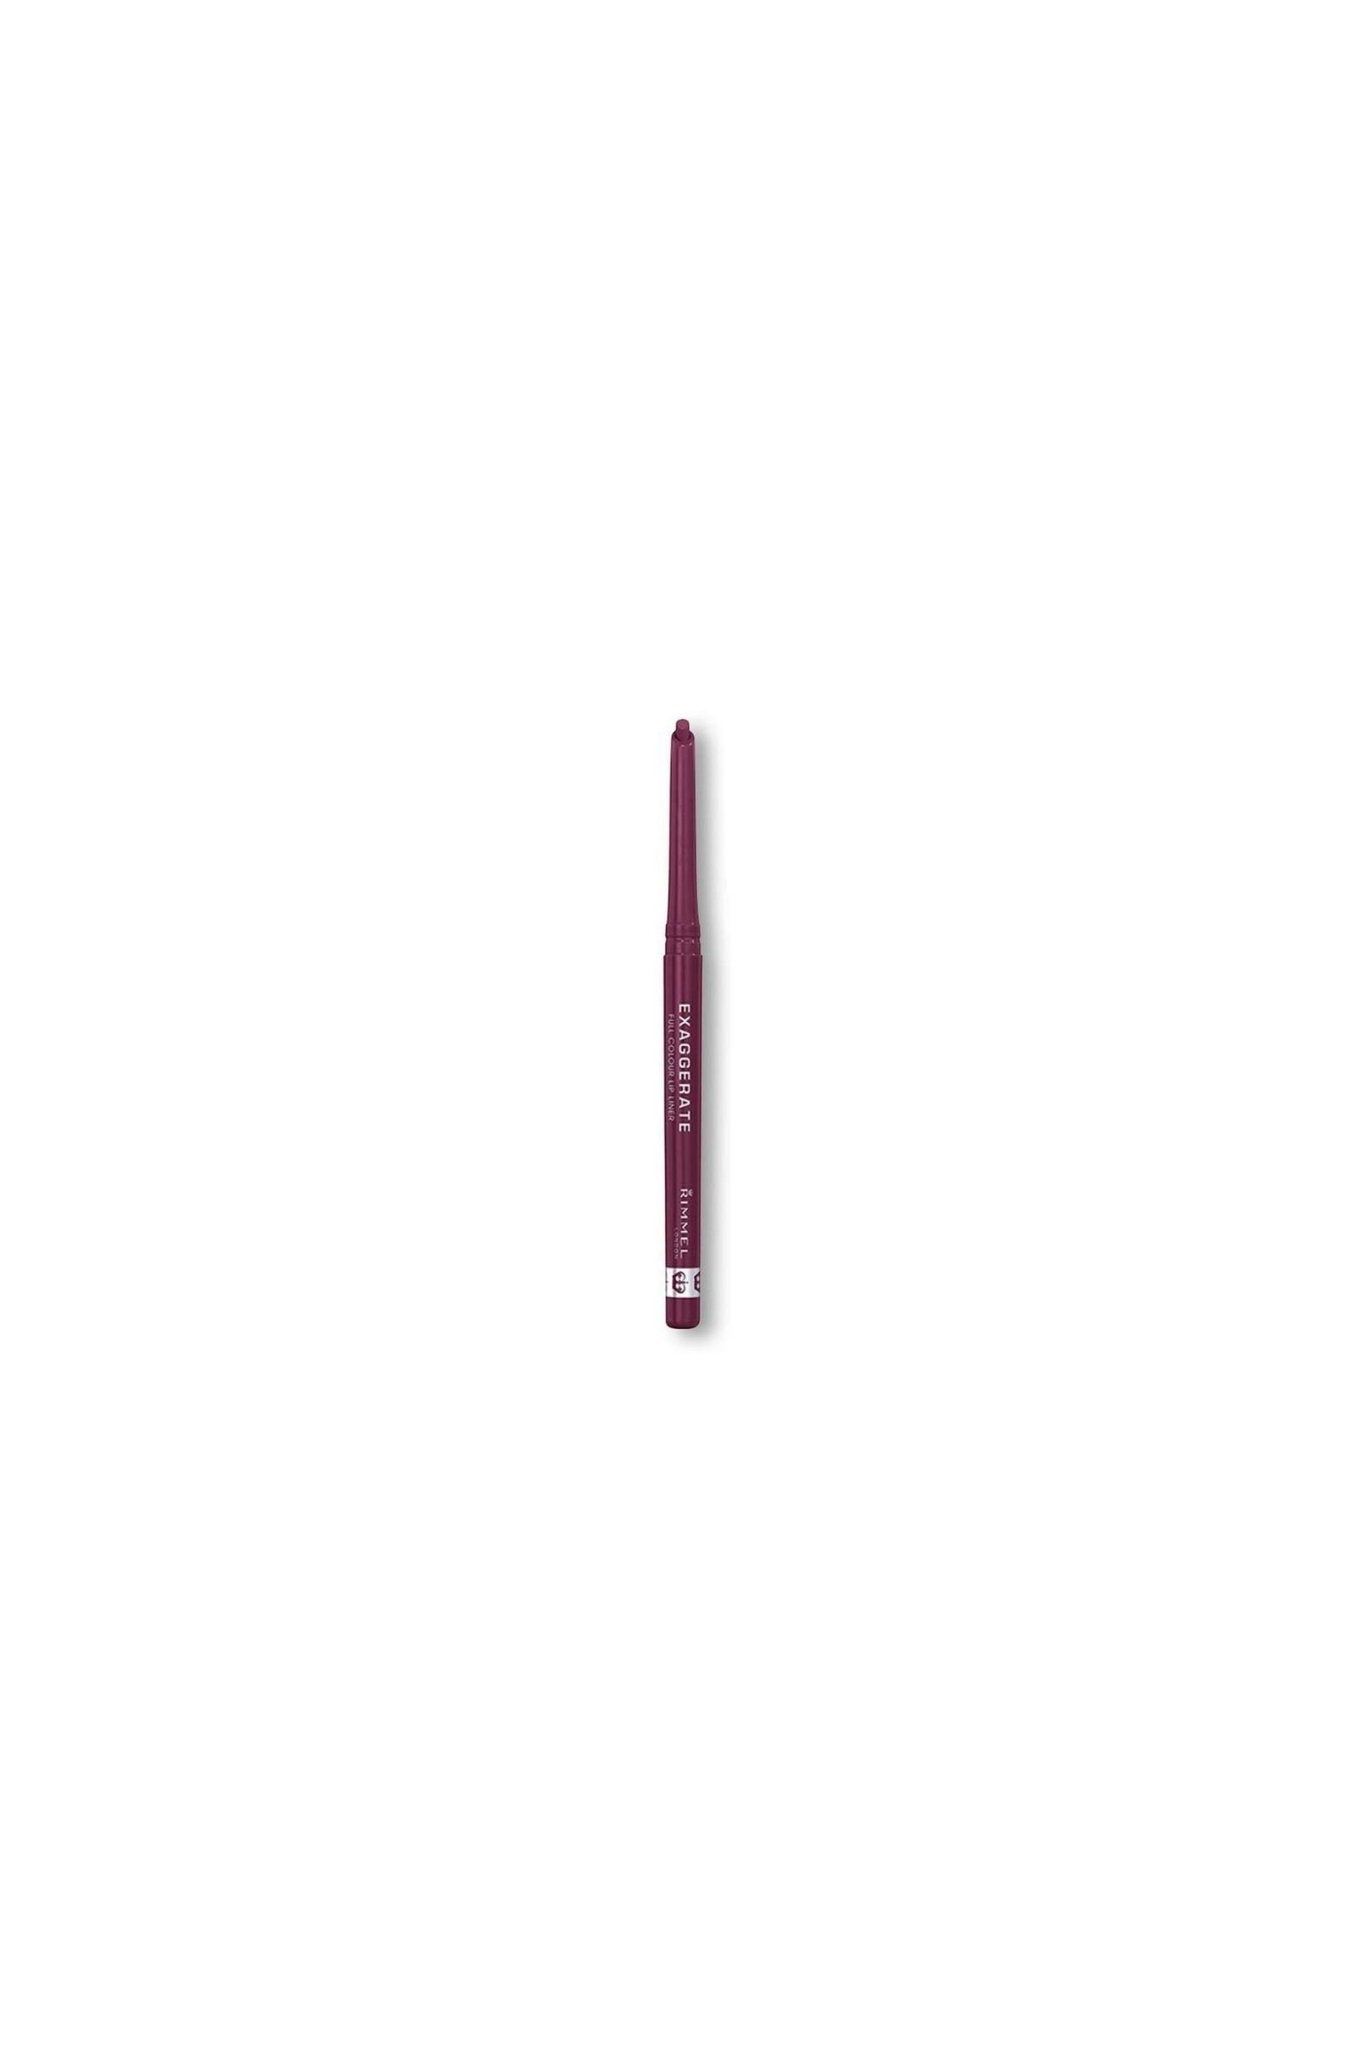 Rimmel Exaggerate Automatic Lip Liner - AllurebeautypkRimmel Exaggerate Automatic Lip Liner